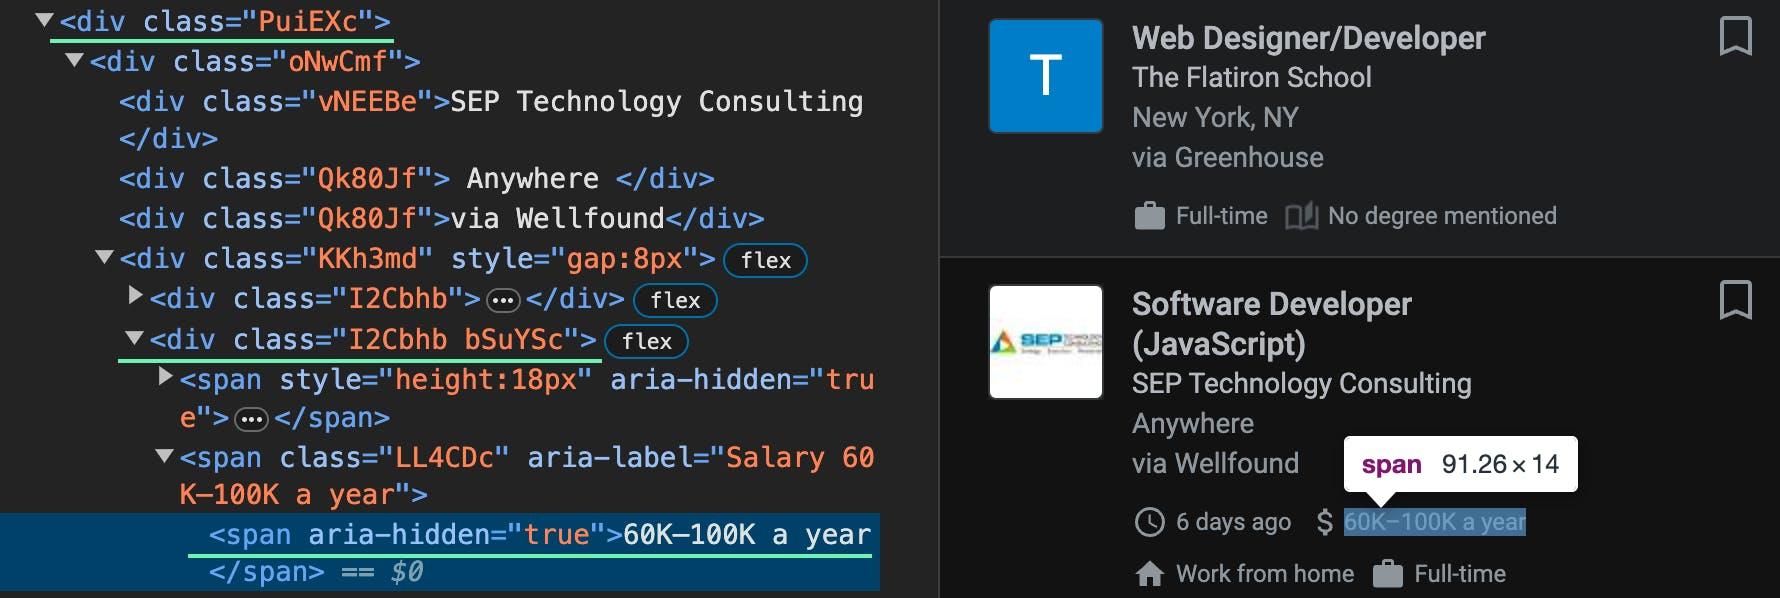 Finding the job salary selector in the HTML